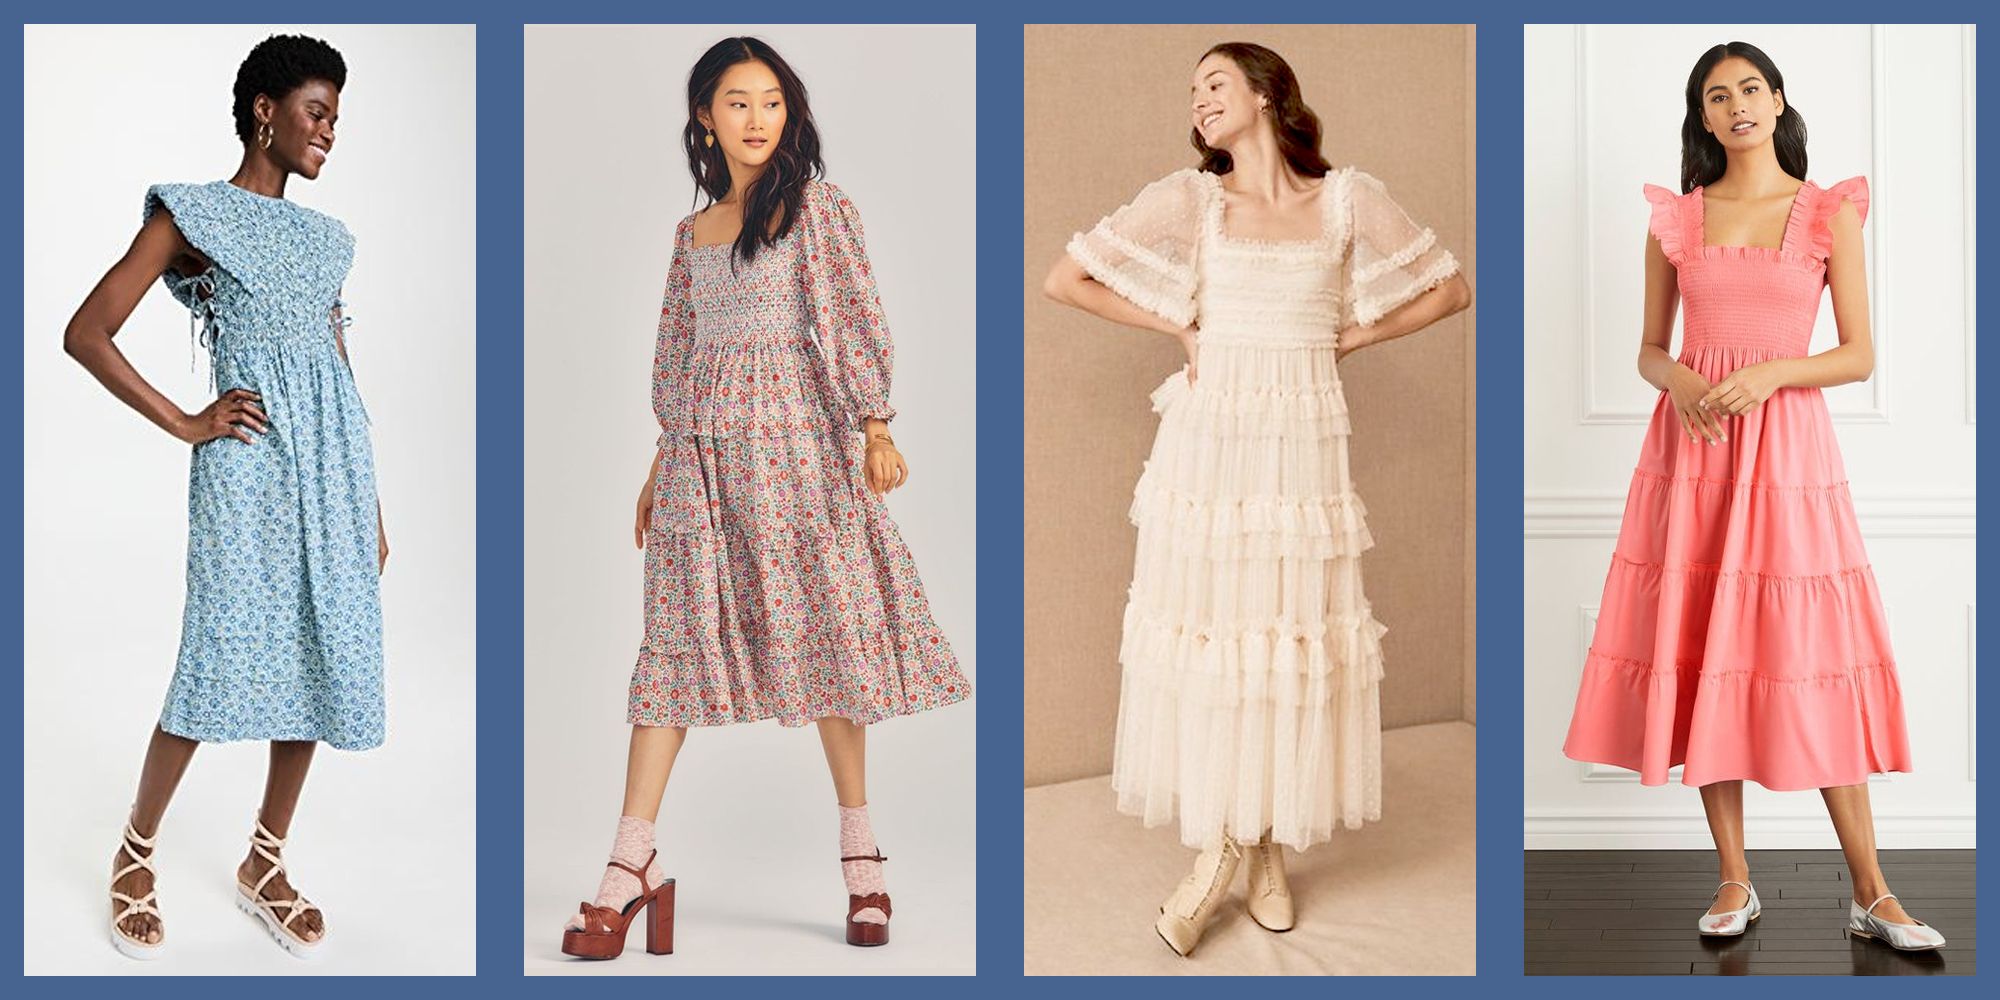 The Best Smocked Dresses: Stylish Smocked Dresses for Every